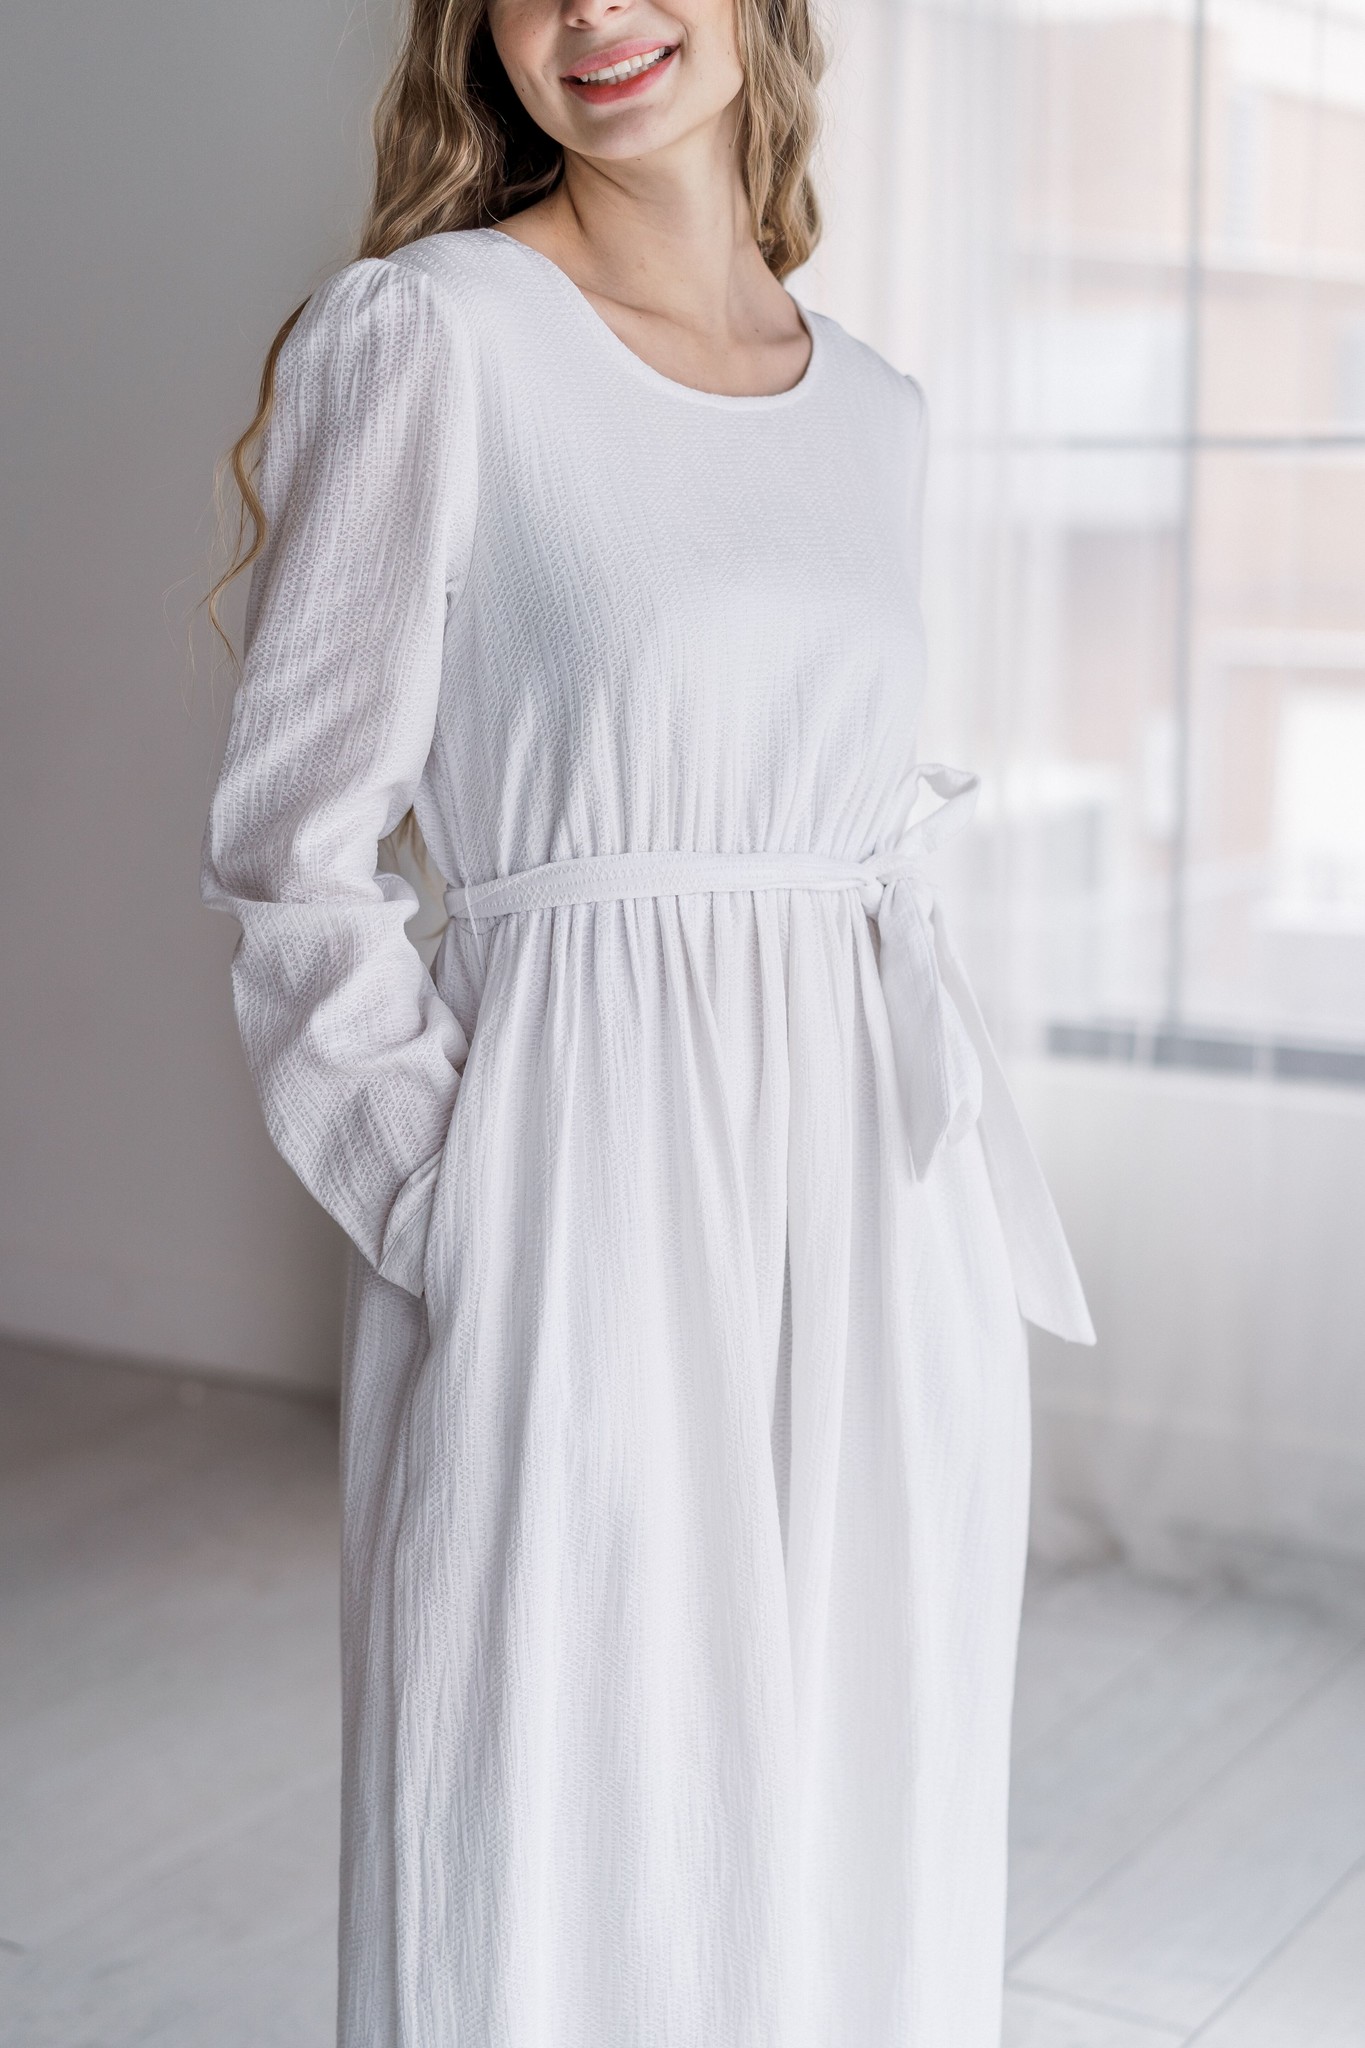 plain white dress with sleeves